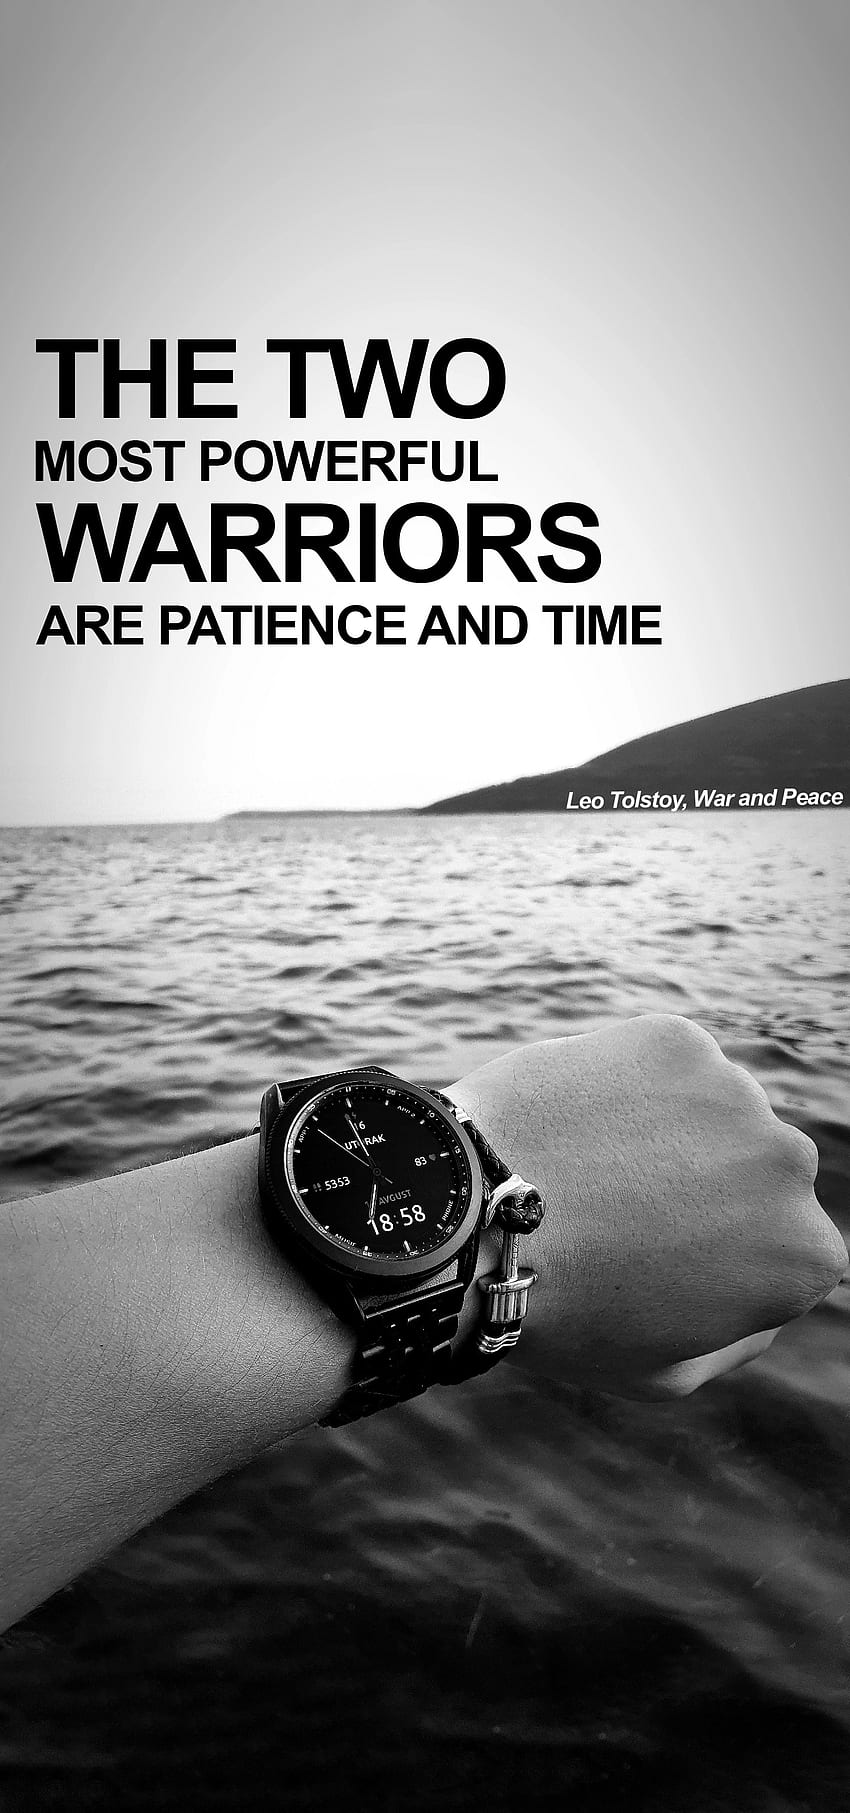 Time quote, sky, warrior, peace, tolstoy, war, saying, text, sea HD phone wallpaper